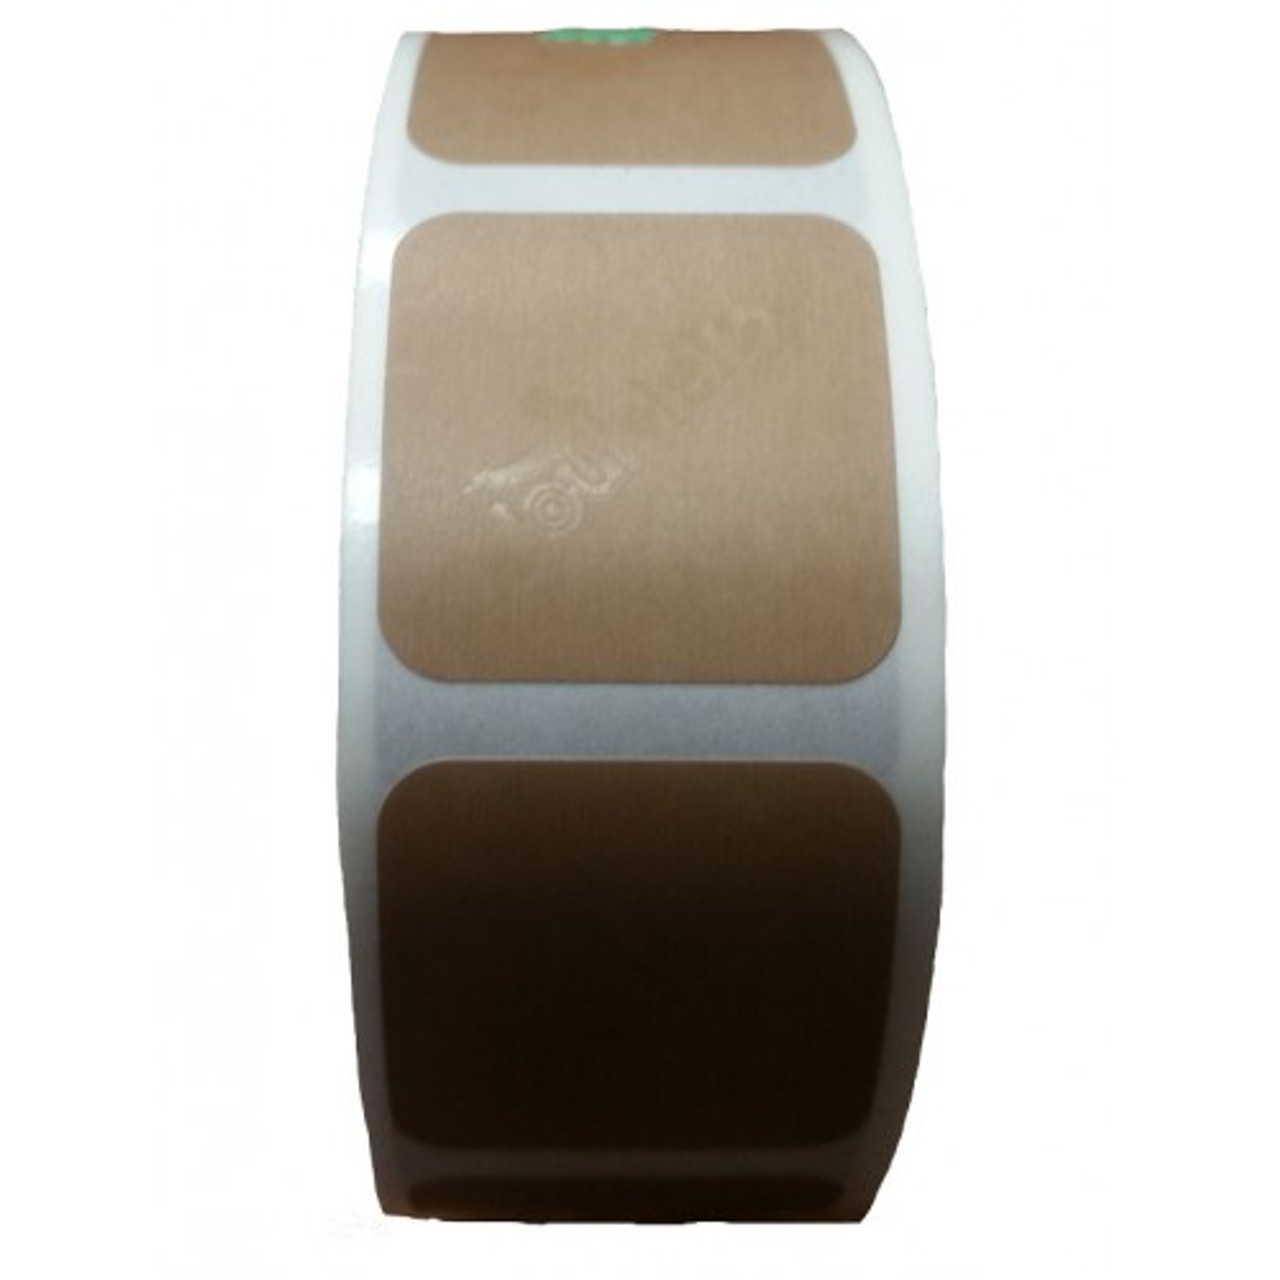 Target Patches Tan Roll (1000)

DoubleTap Sports target pasters/patches for plain cardboard and backers. Made with premium glue, and have a watermark of the DoubleTap Sports logo. 

Dimensions: 7/8" x 7/8"